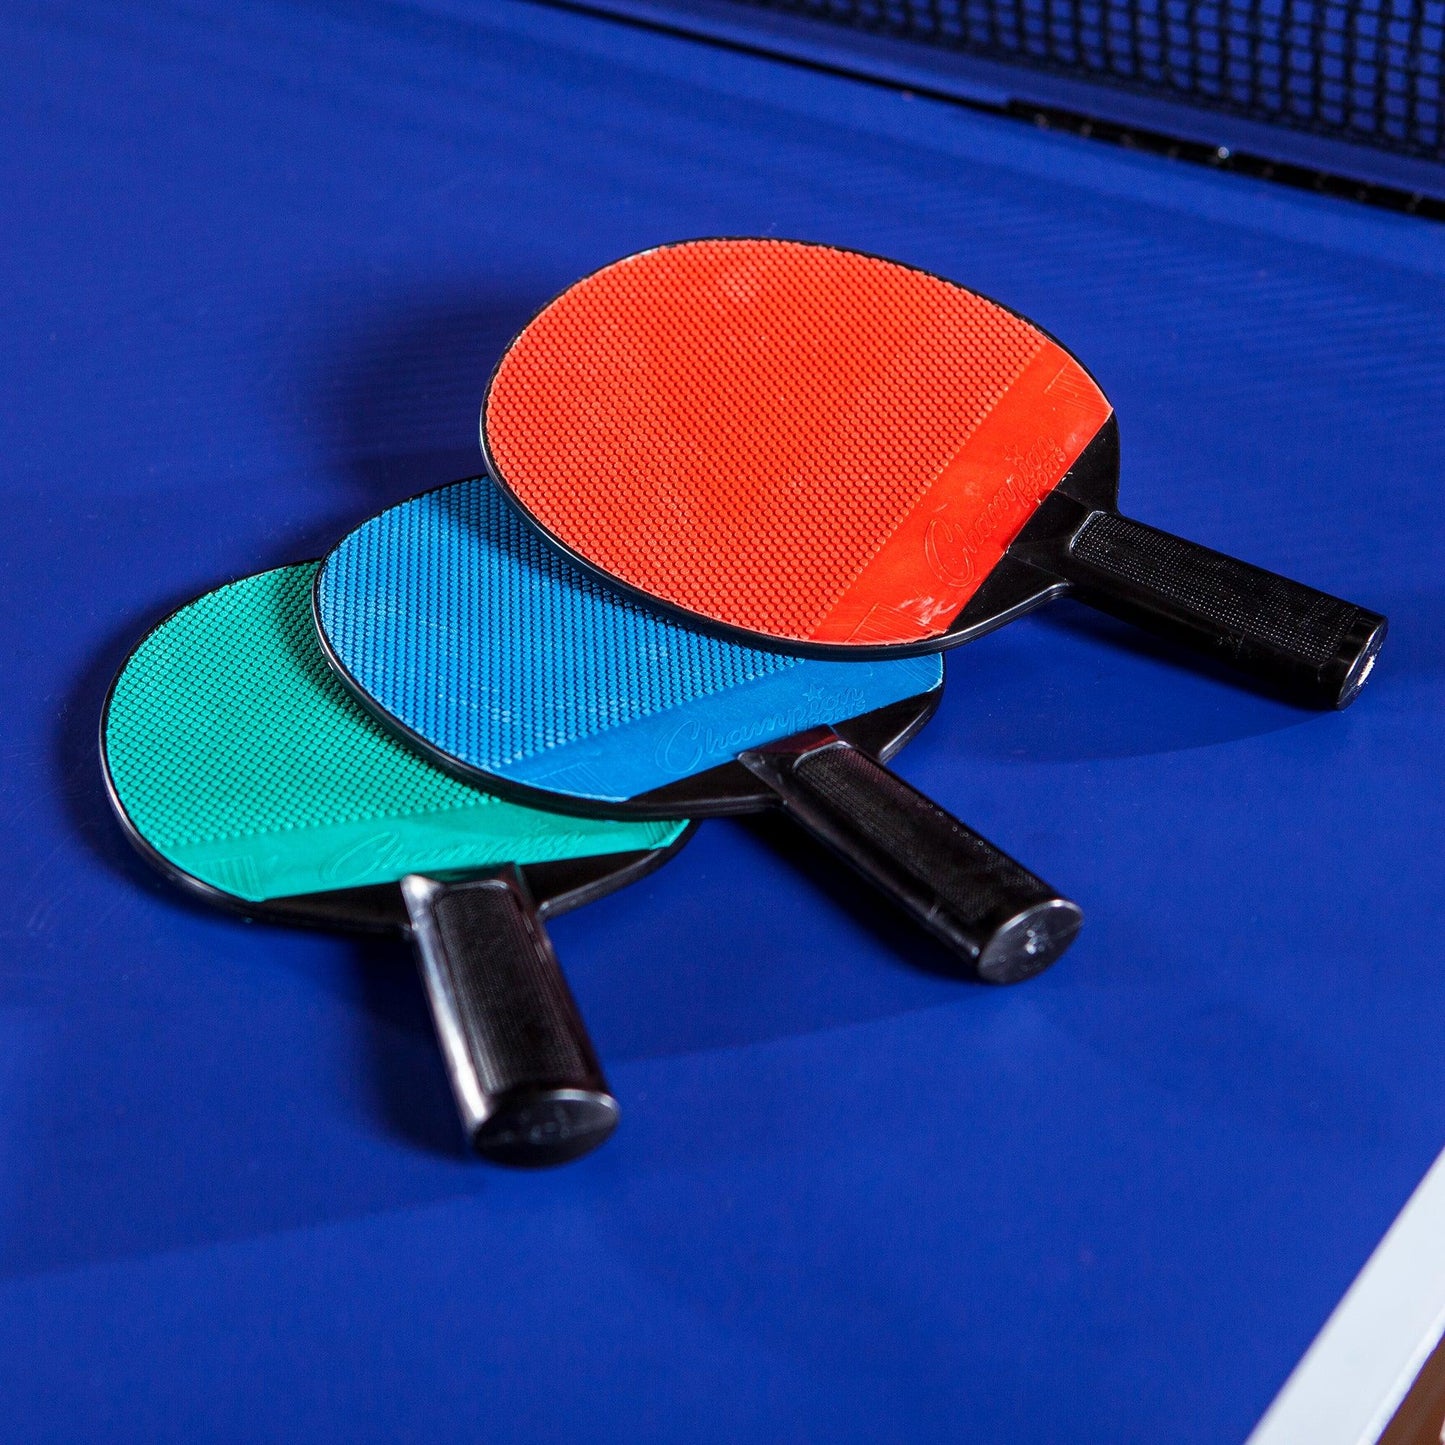 Plastic Rubber Face Table Tennis Paddle, Pack of 6 - Loomini